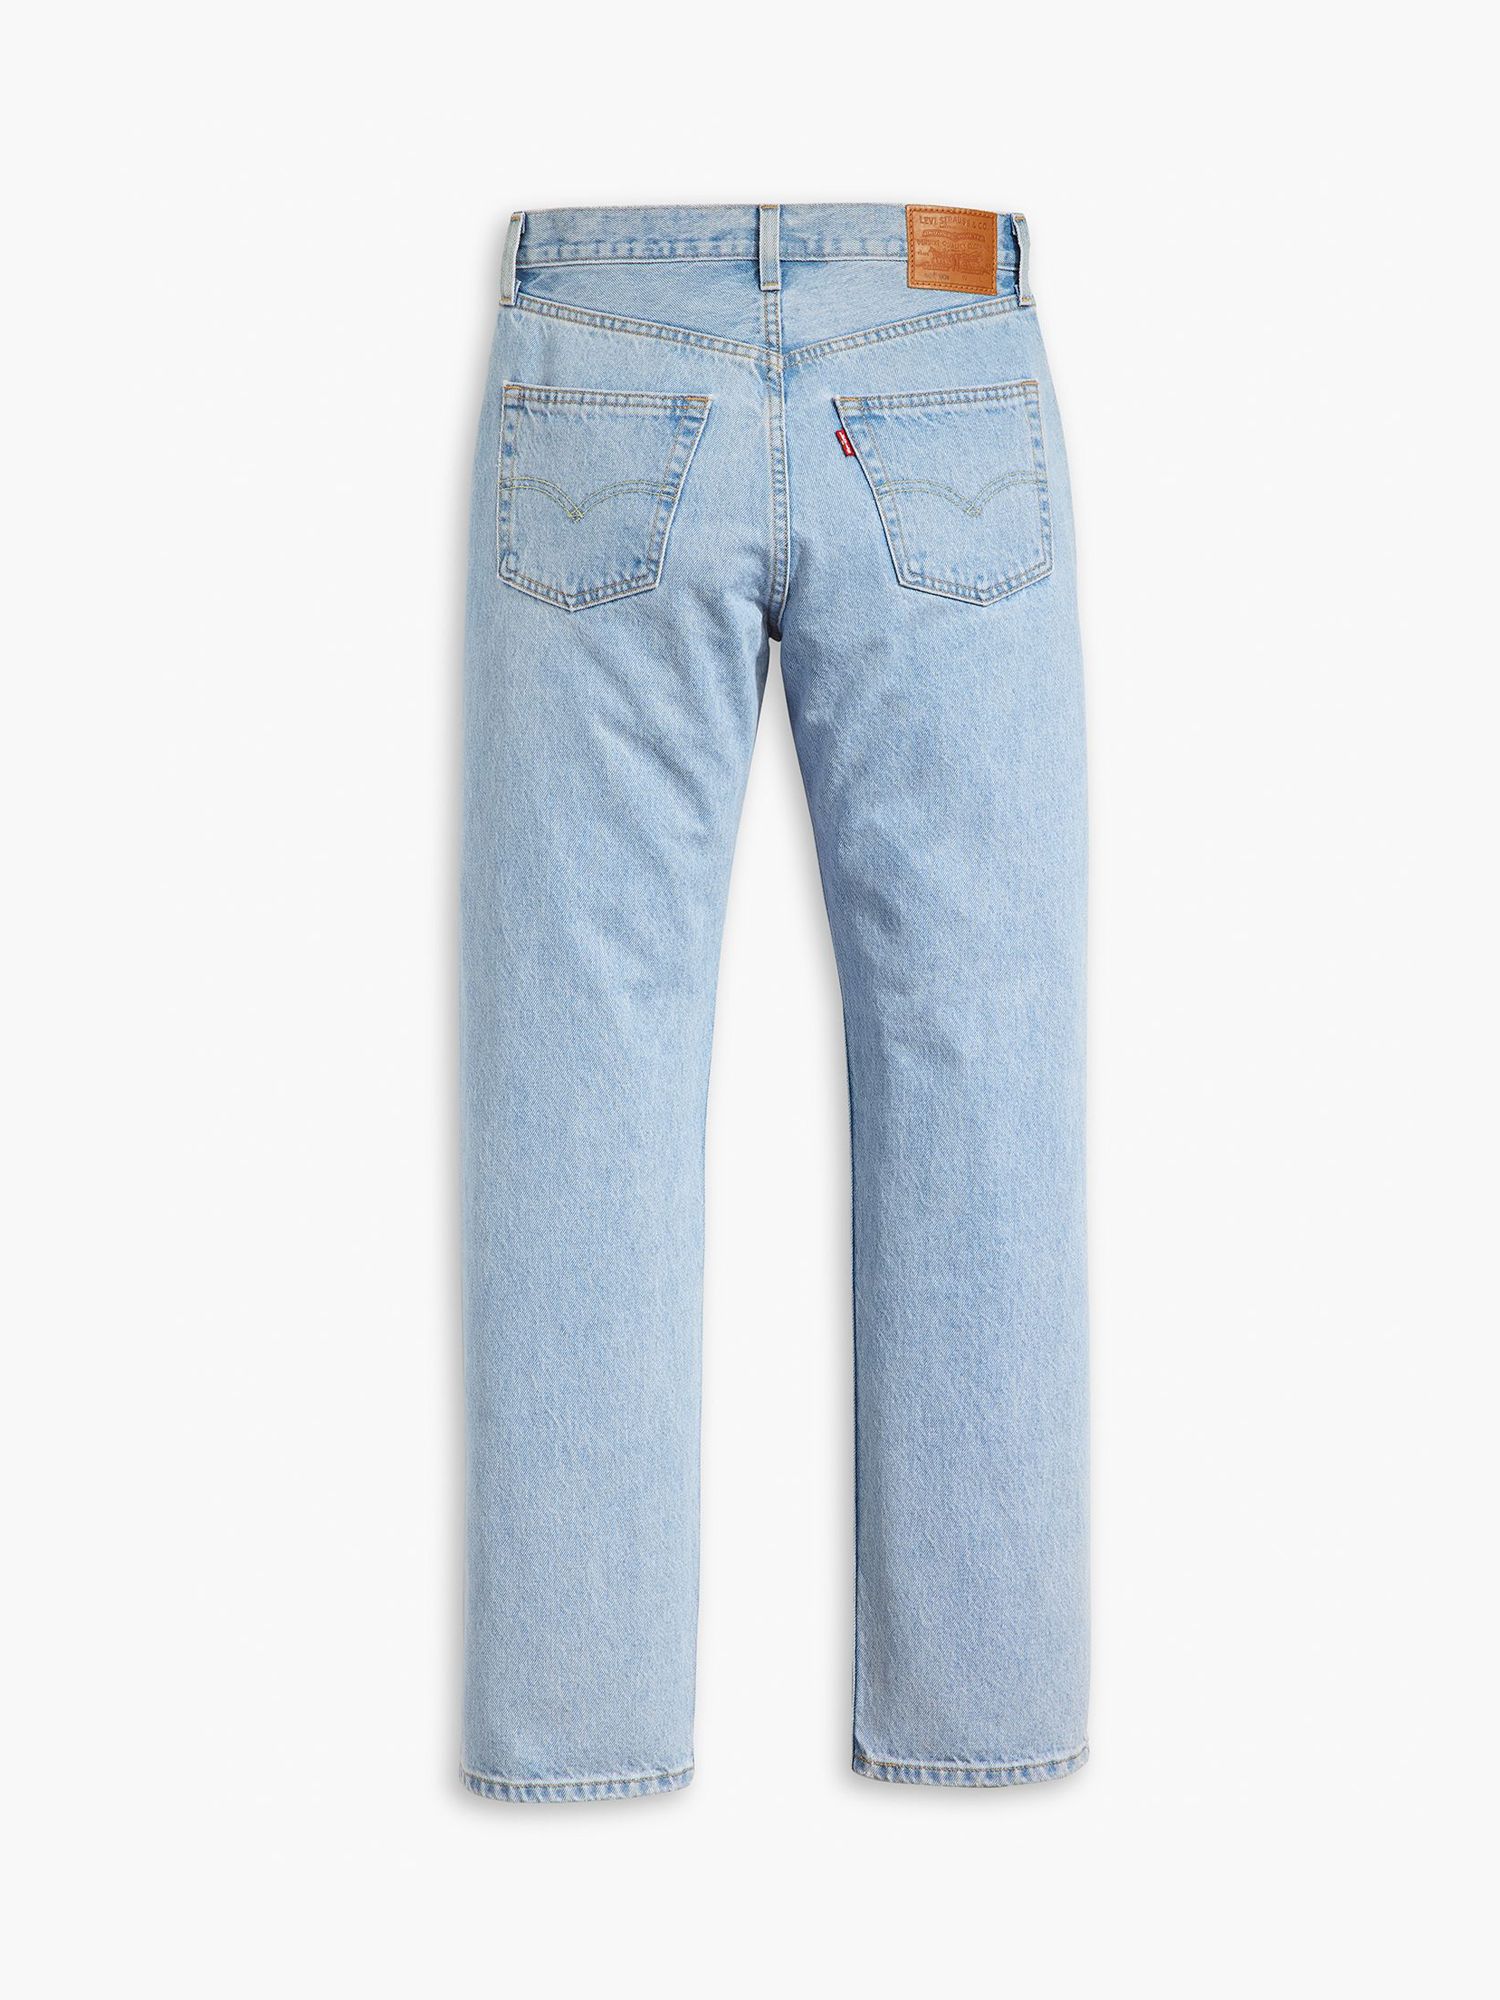 Levi's 501 90's Chaps Jeans, Done And Dusted, W27/L30